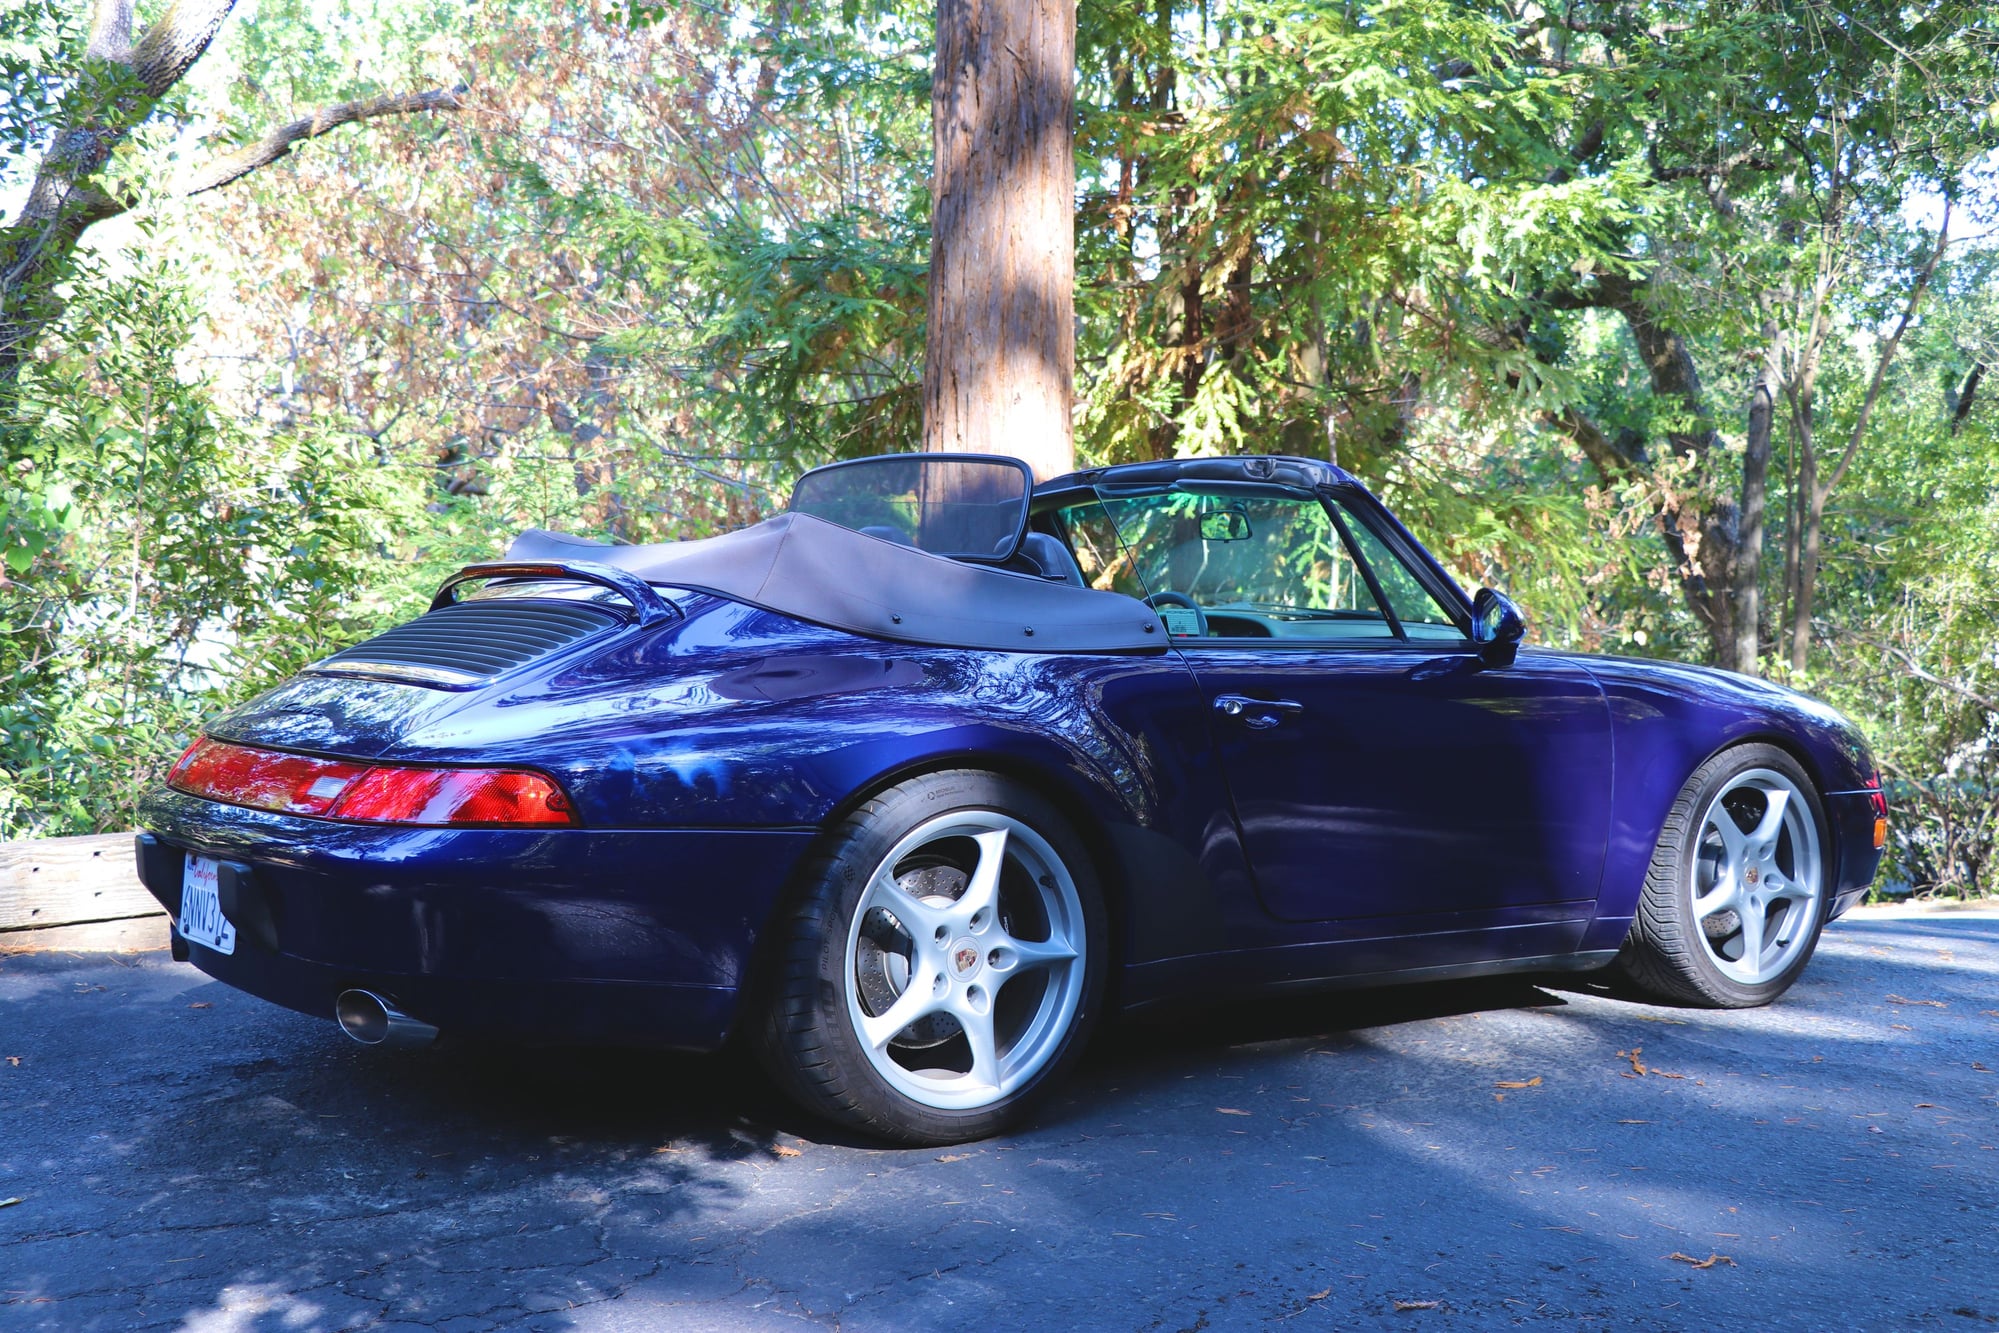 1995 Porsche 911 - **FOR SALE** Iris Blue over Classic Grey 1995 Carrera 2 Cabriolet - New Top! - Used - VIN WP0CA2999SS340410 - 87,000 Miles - 6 cyl - 2WD - Manual - Convertible - Blue - Lafayette, CA 94549, United States